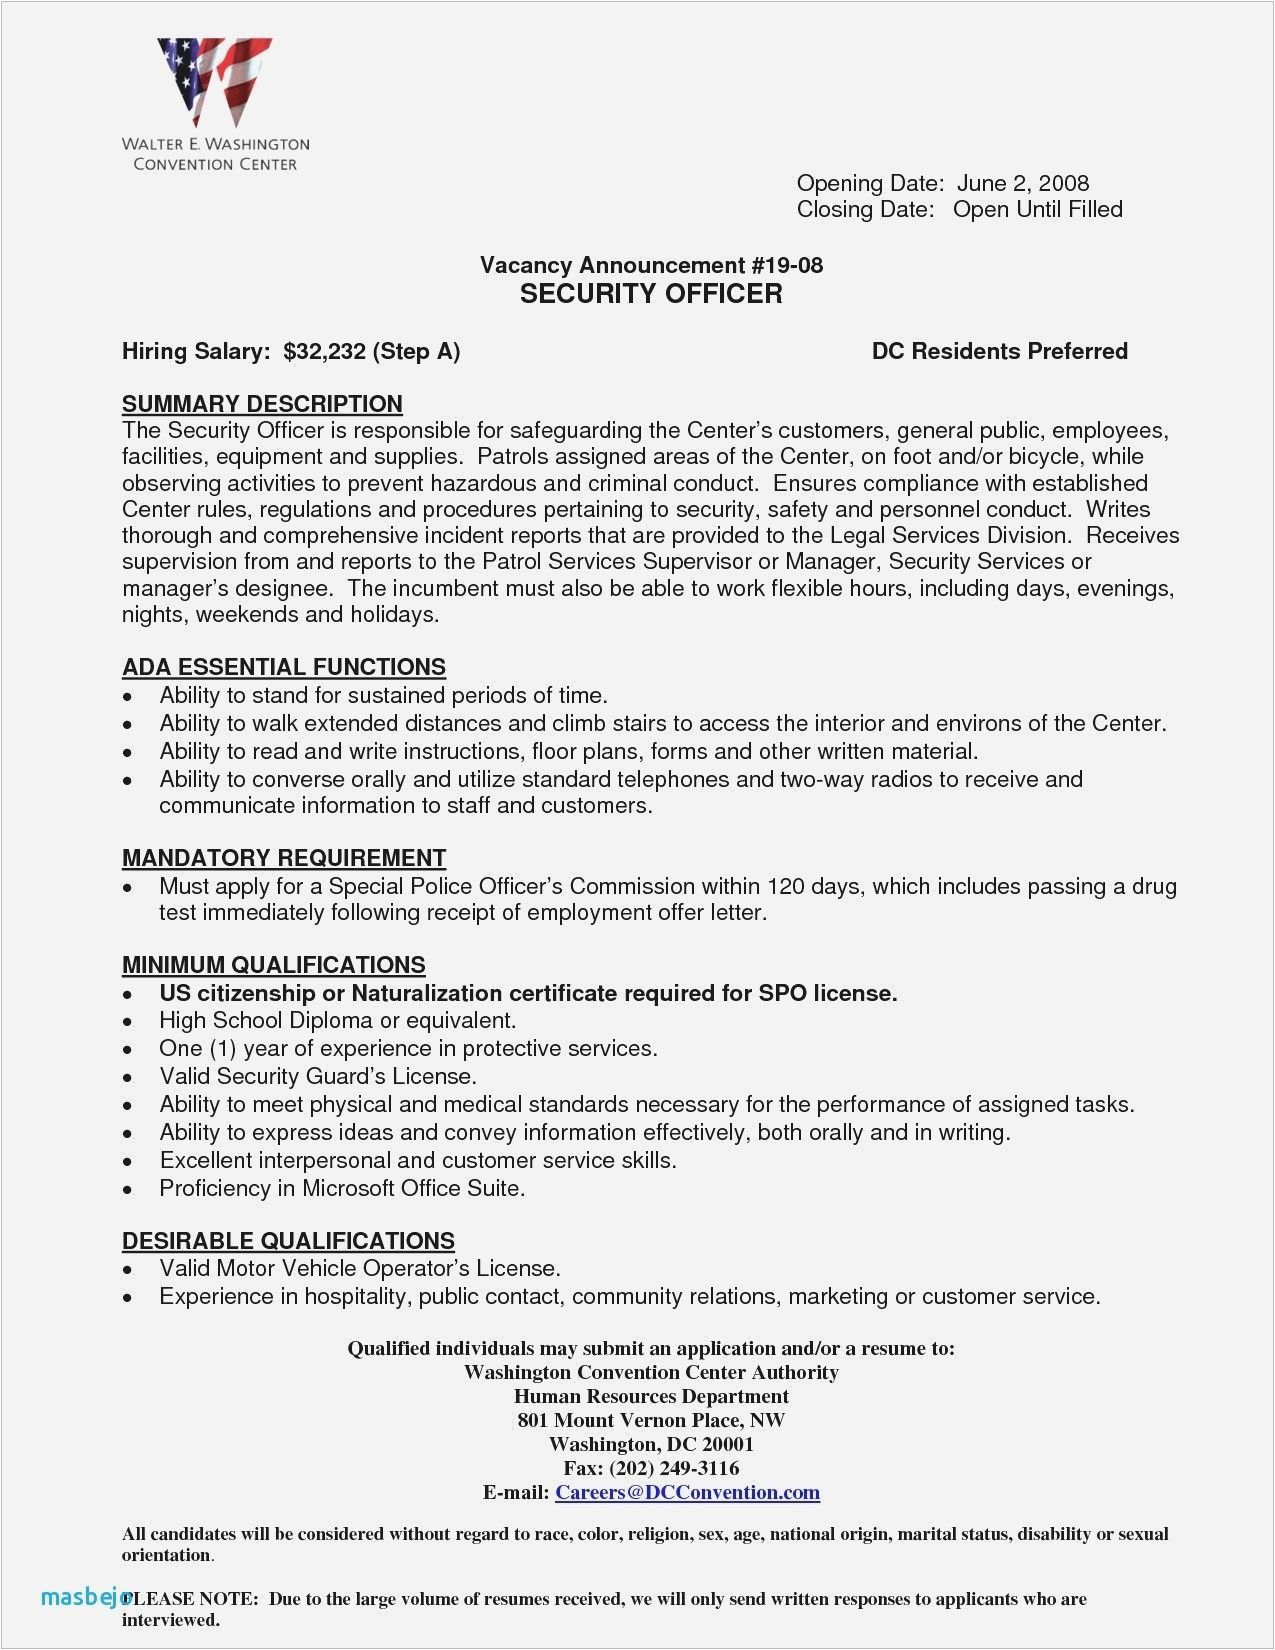 correctional officer resume template